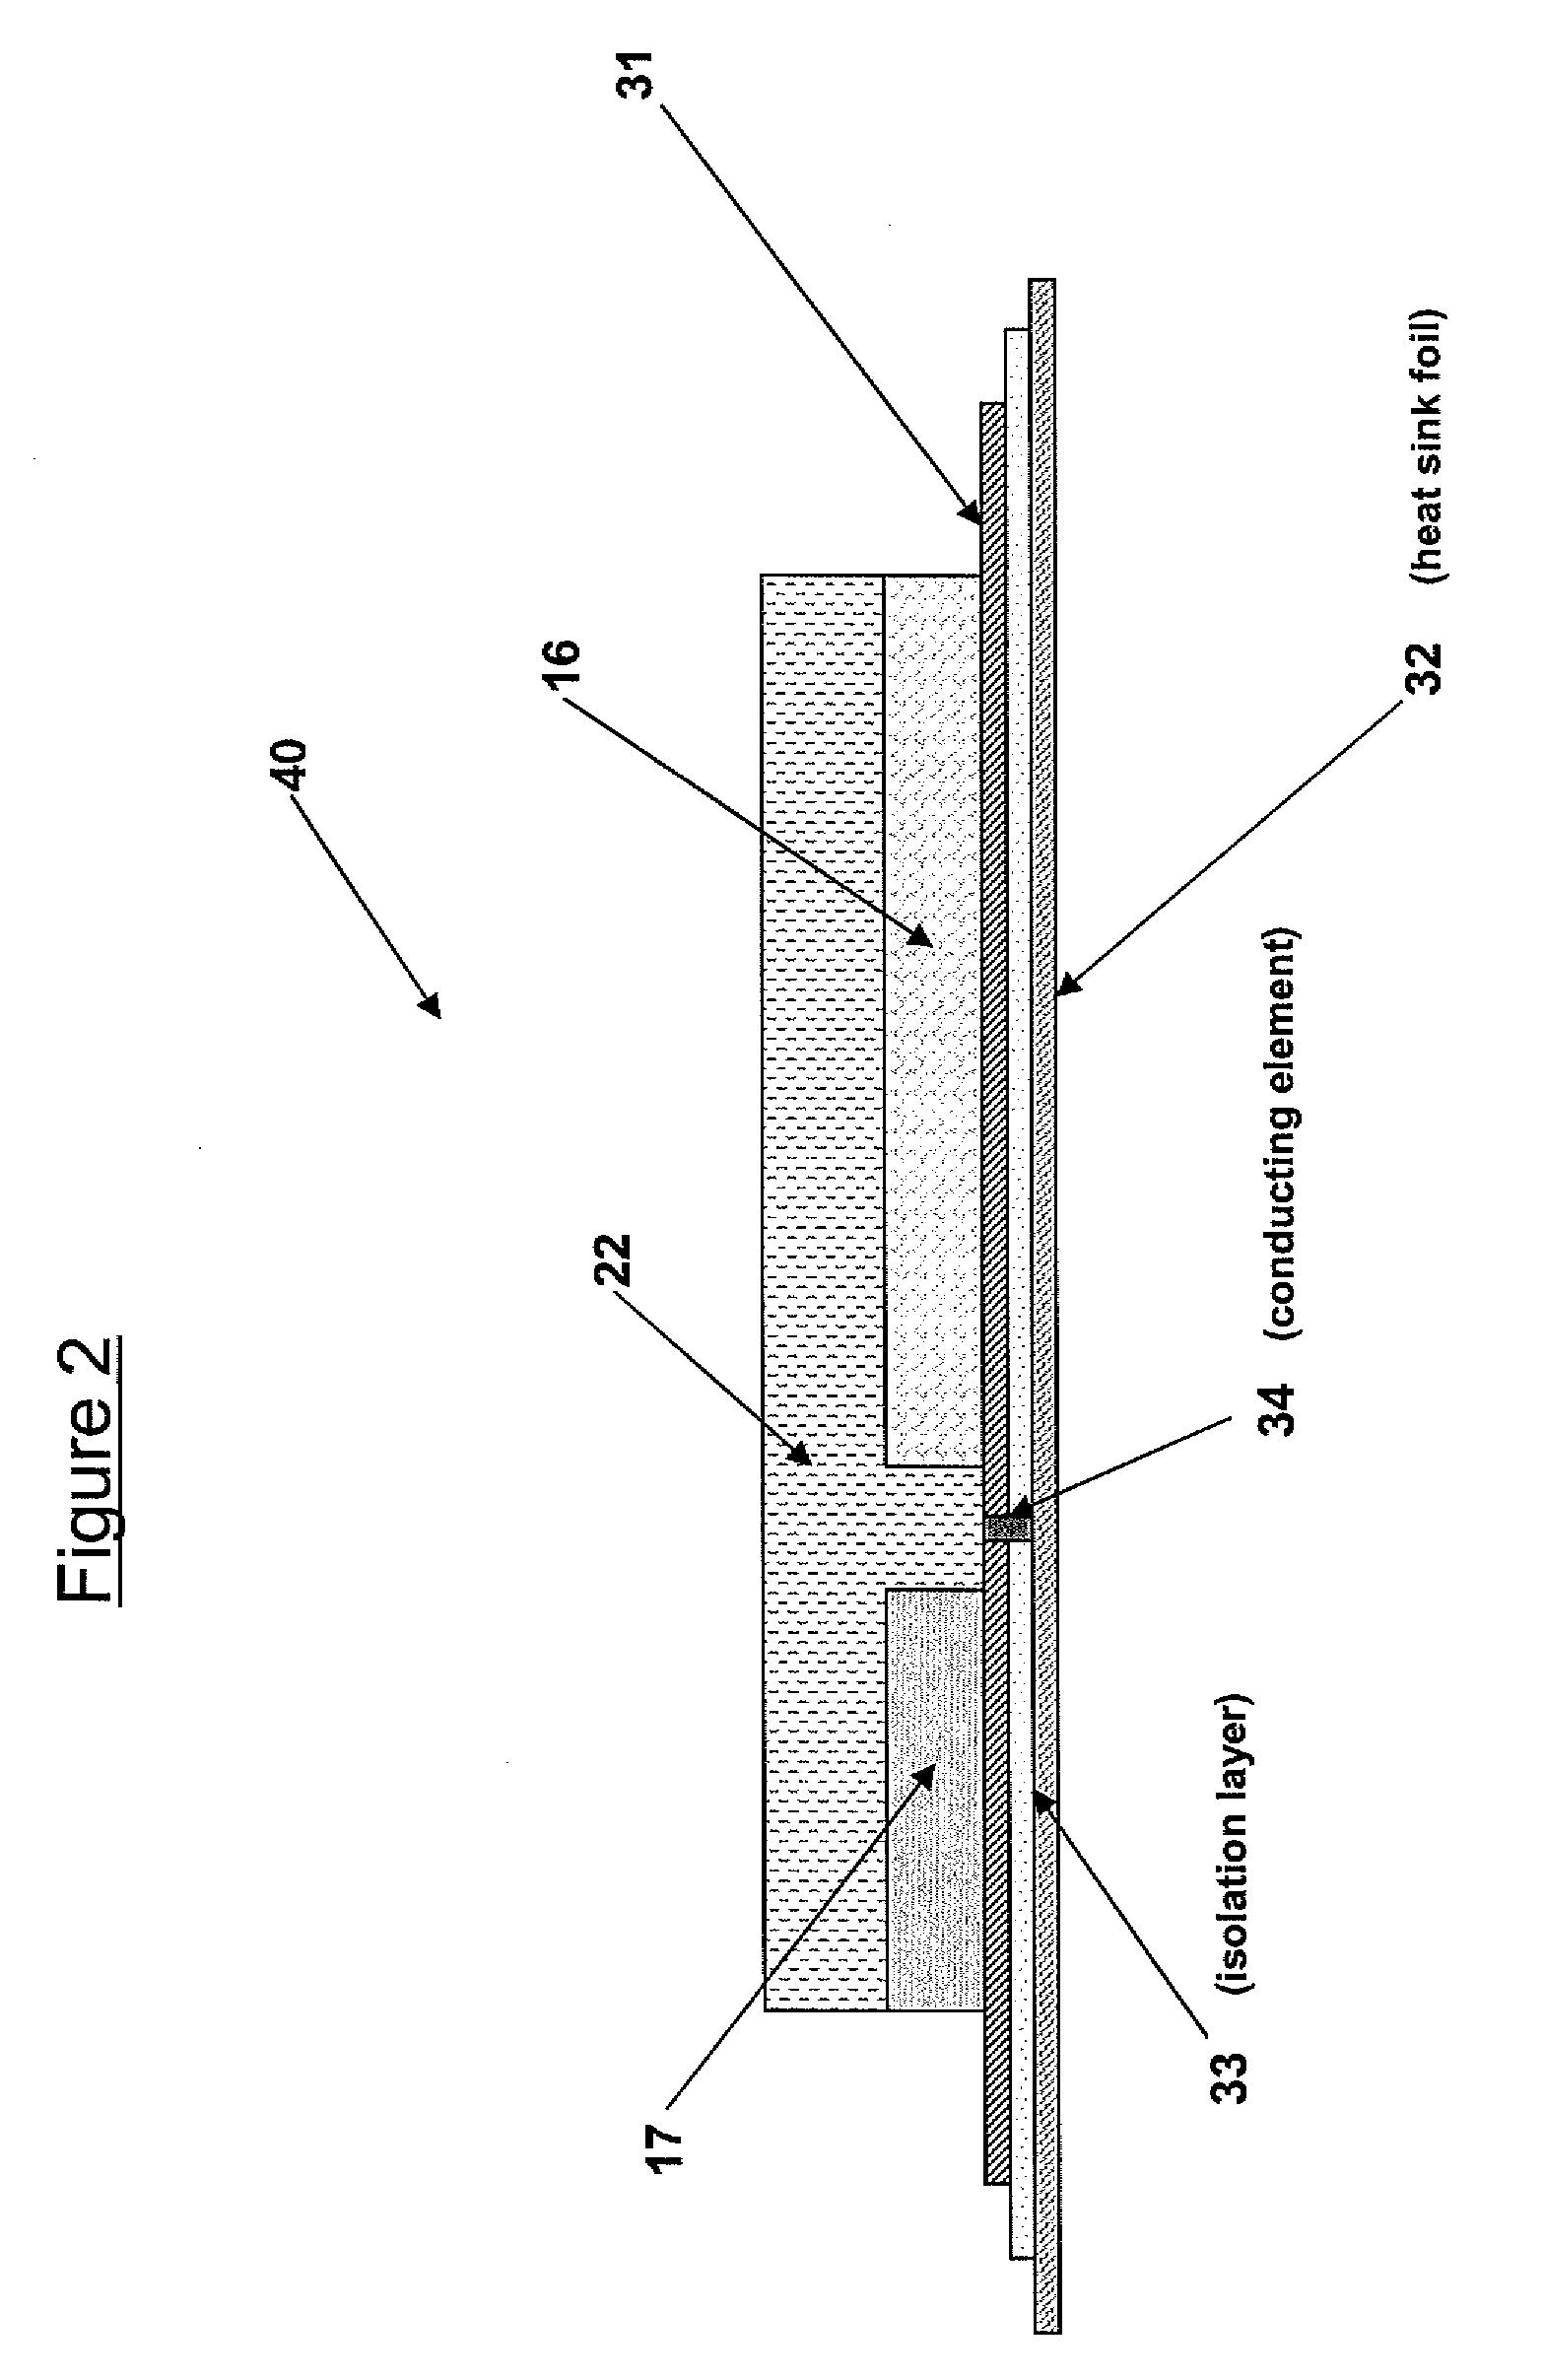 Process and system for providing electrical energy to a shielded medical imaging suite